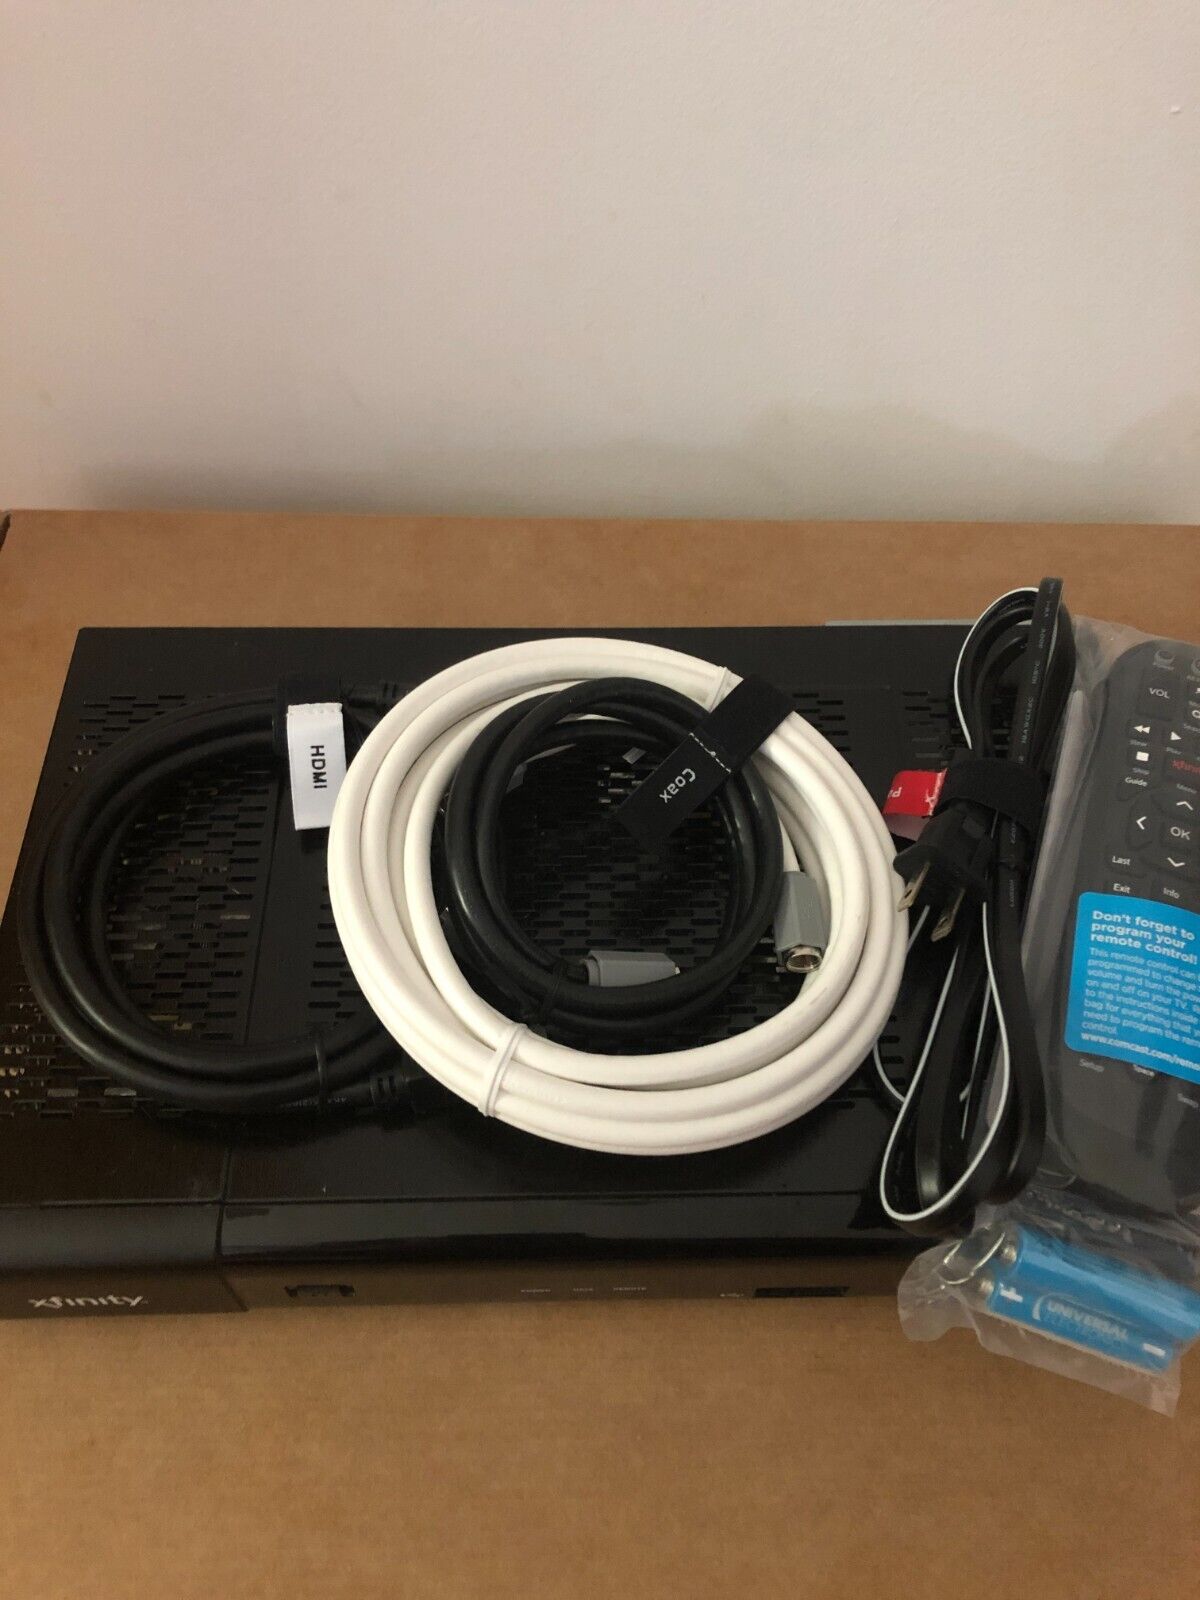 CISCO RNG 150N Comcast Xfinity Cable Converter Box w/ remote, cables and cord